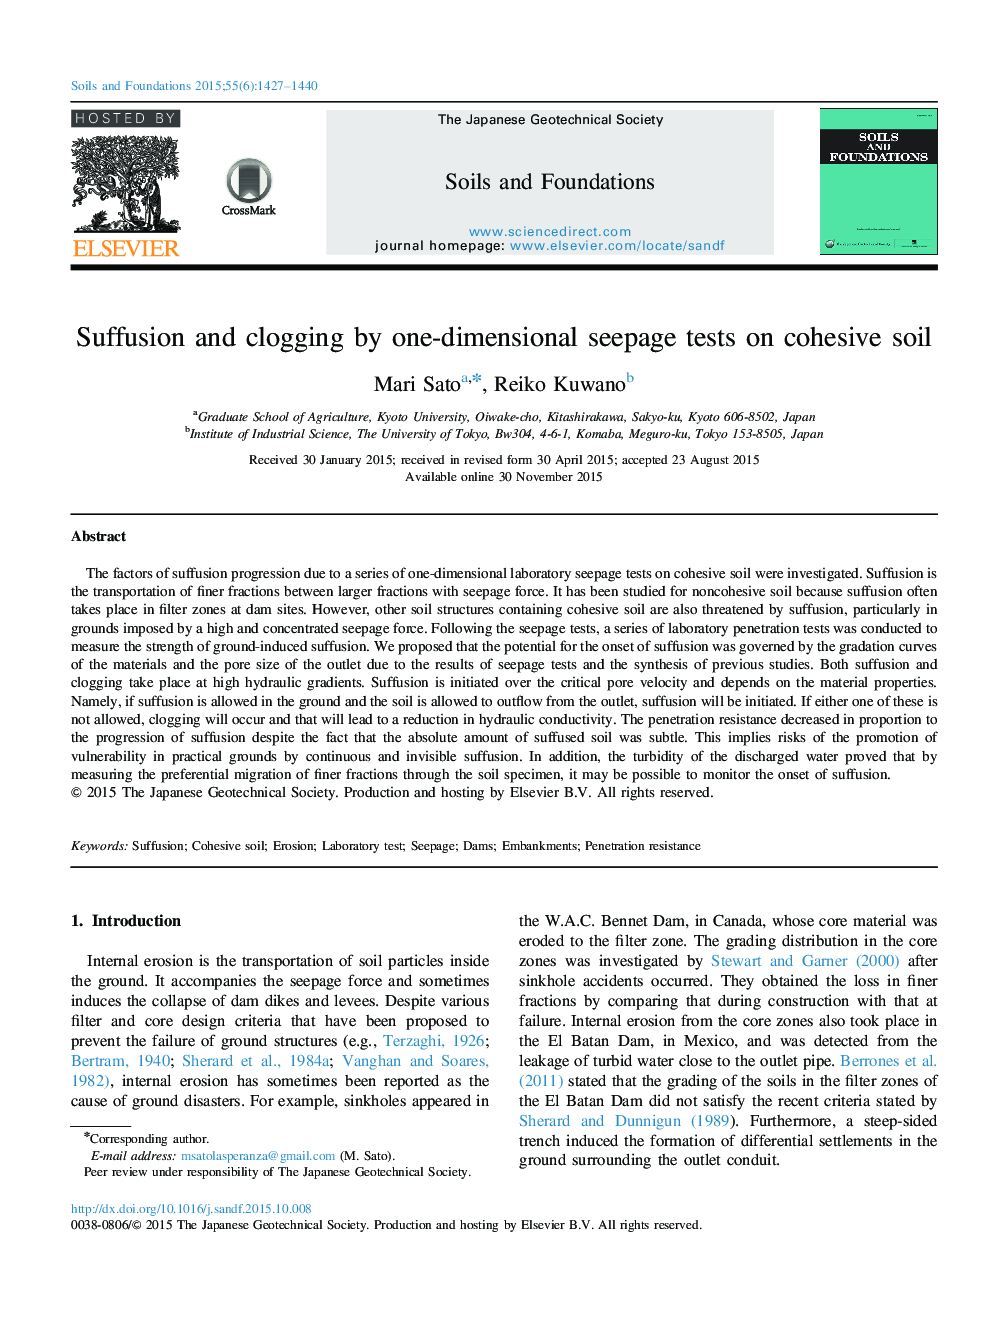 Suffusion and clogging by one-dimensional seepage tests on cohesive soil